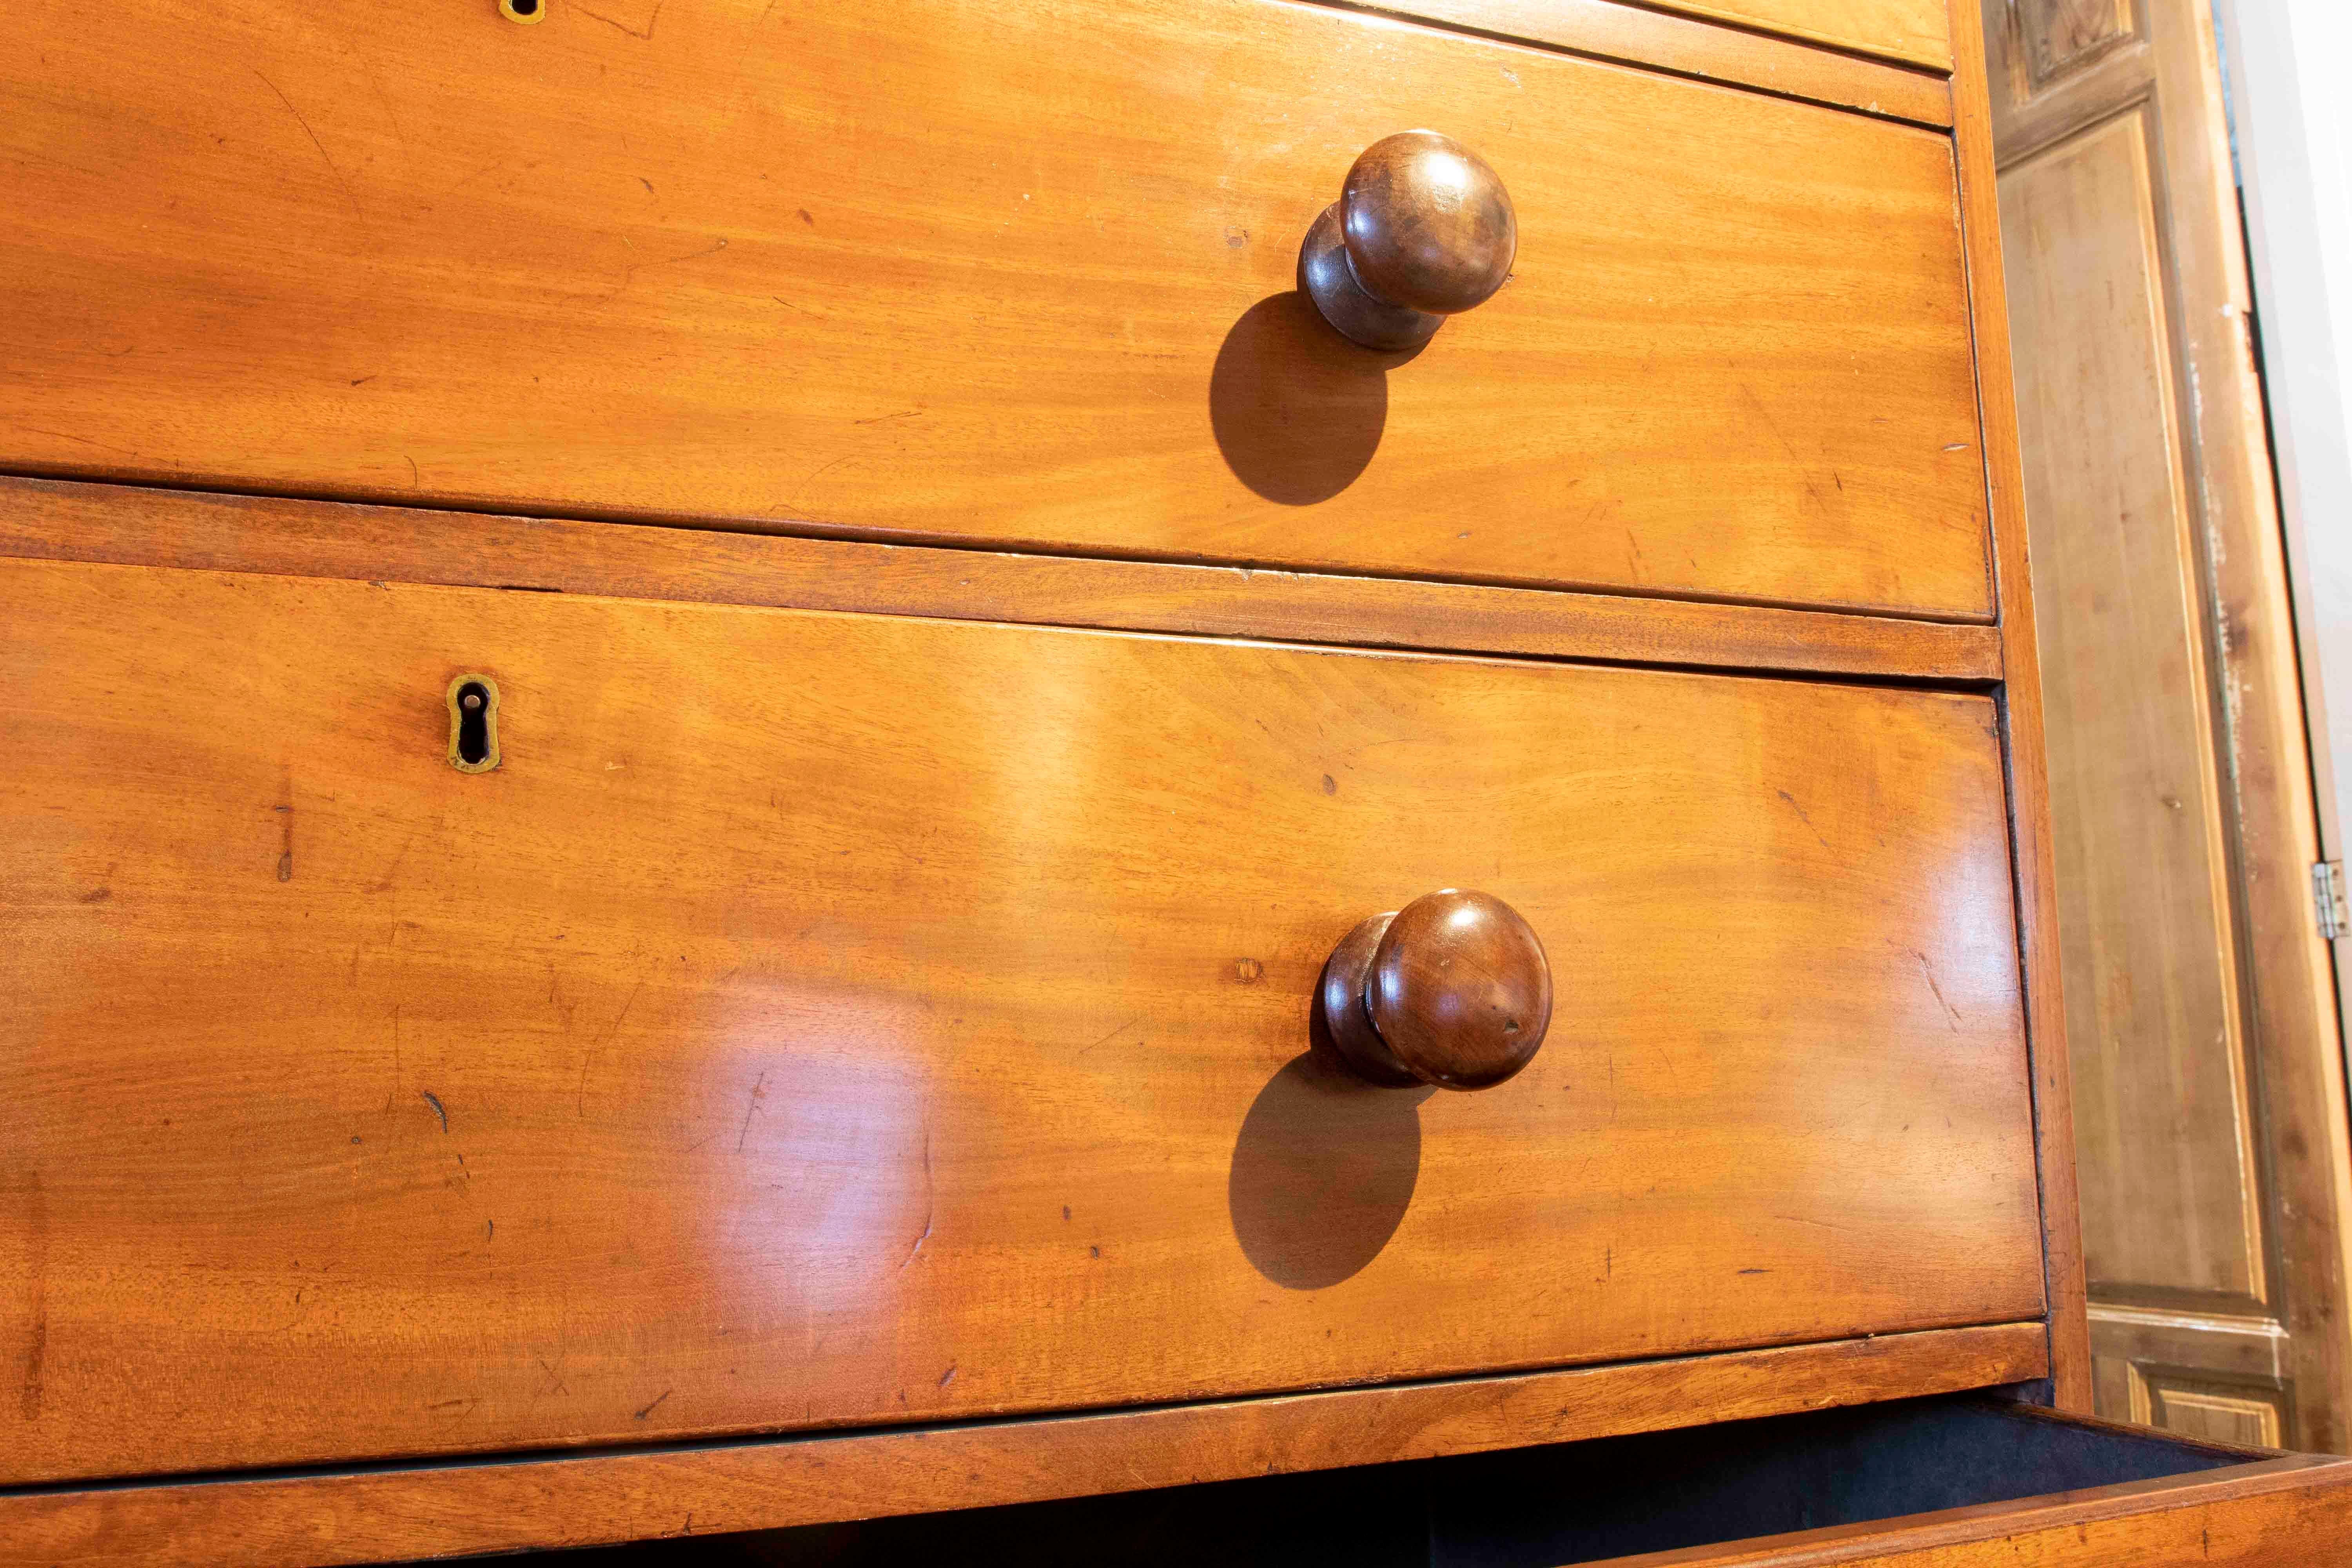 19th Century Chest of Drawers - English Mahogany Two-body Desk For Sale 13